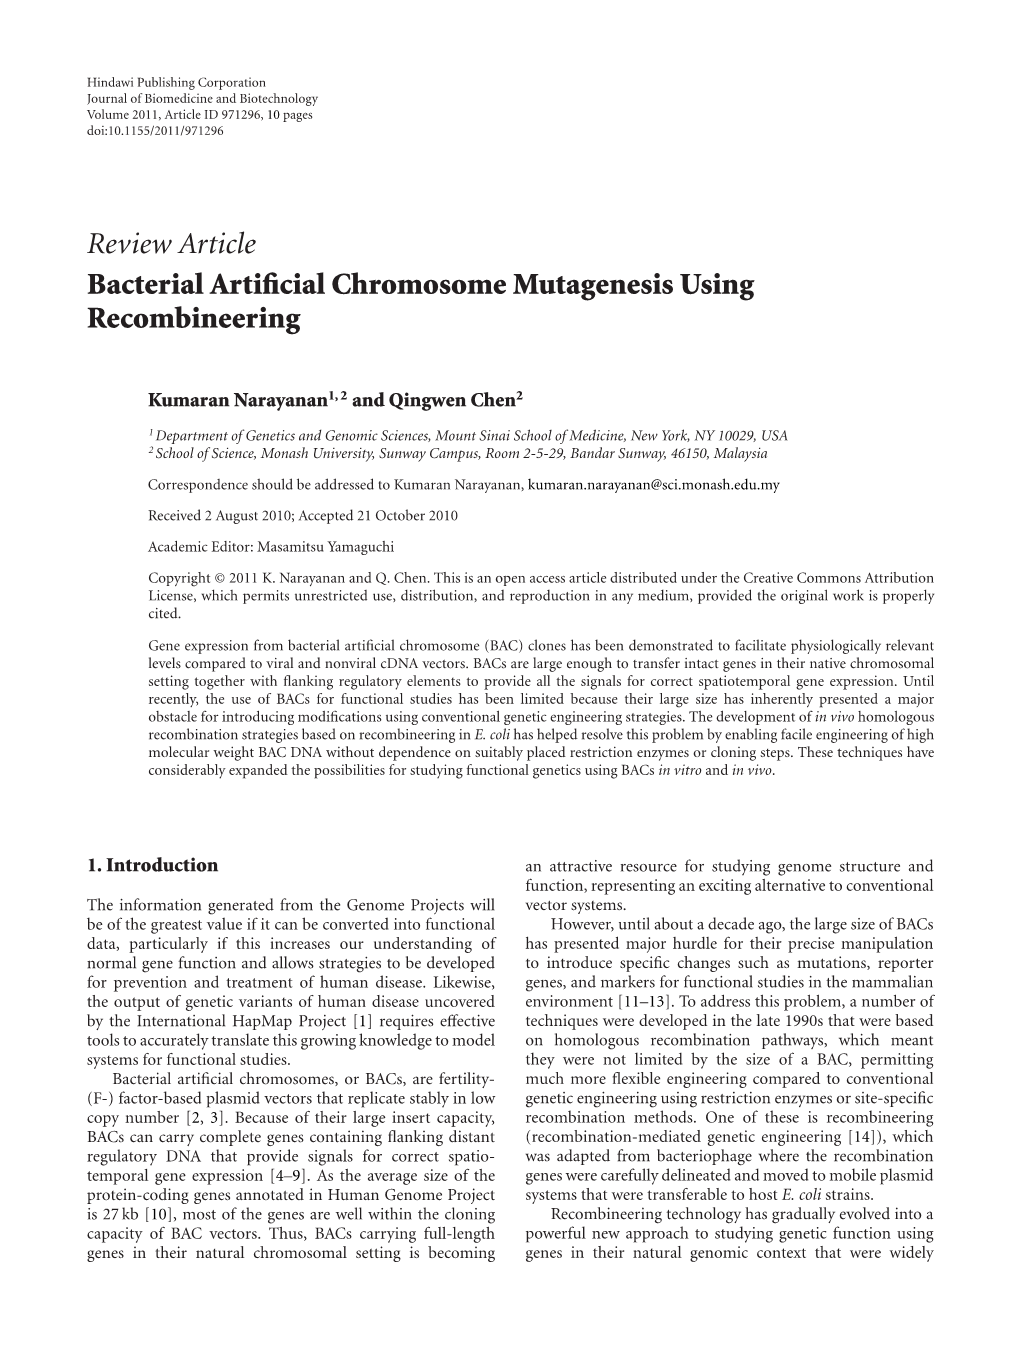 Bacterial Artificial Chromosome Mutagenesis Using Recombineering